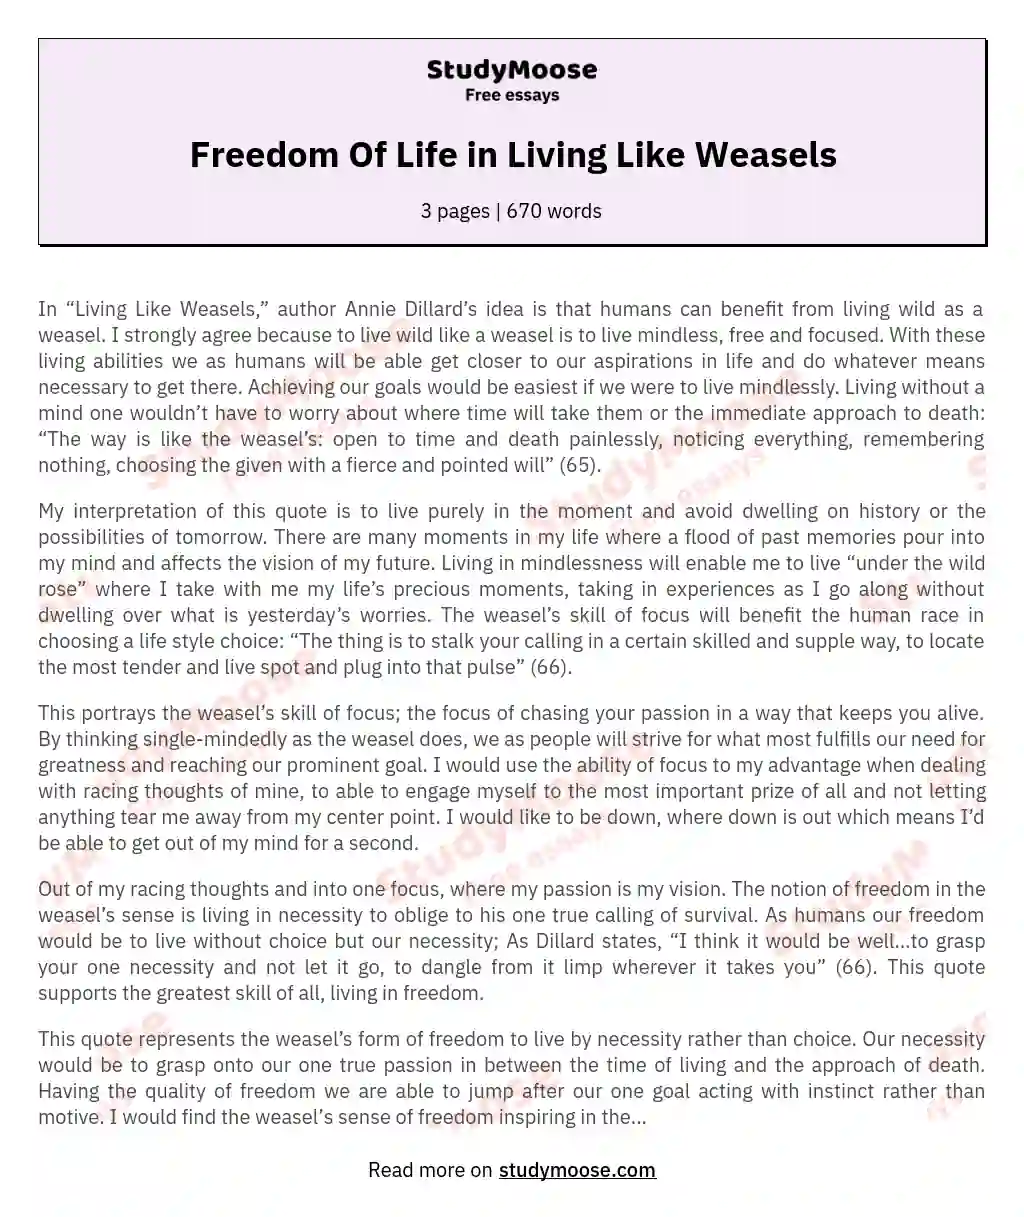 Freedom Of Life in Living Like Weasels essay